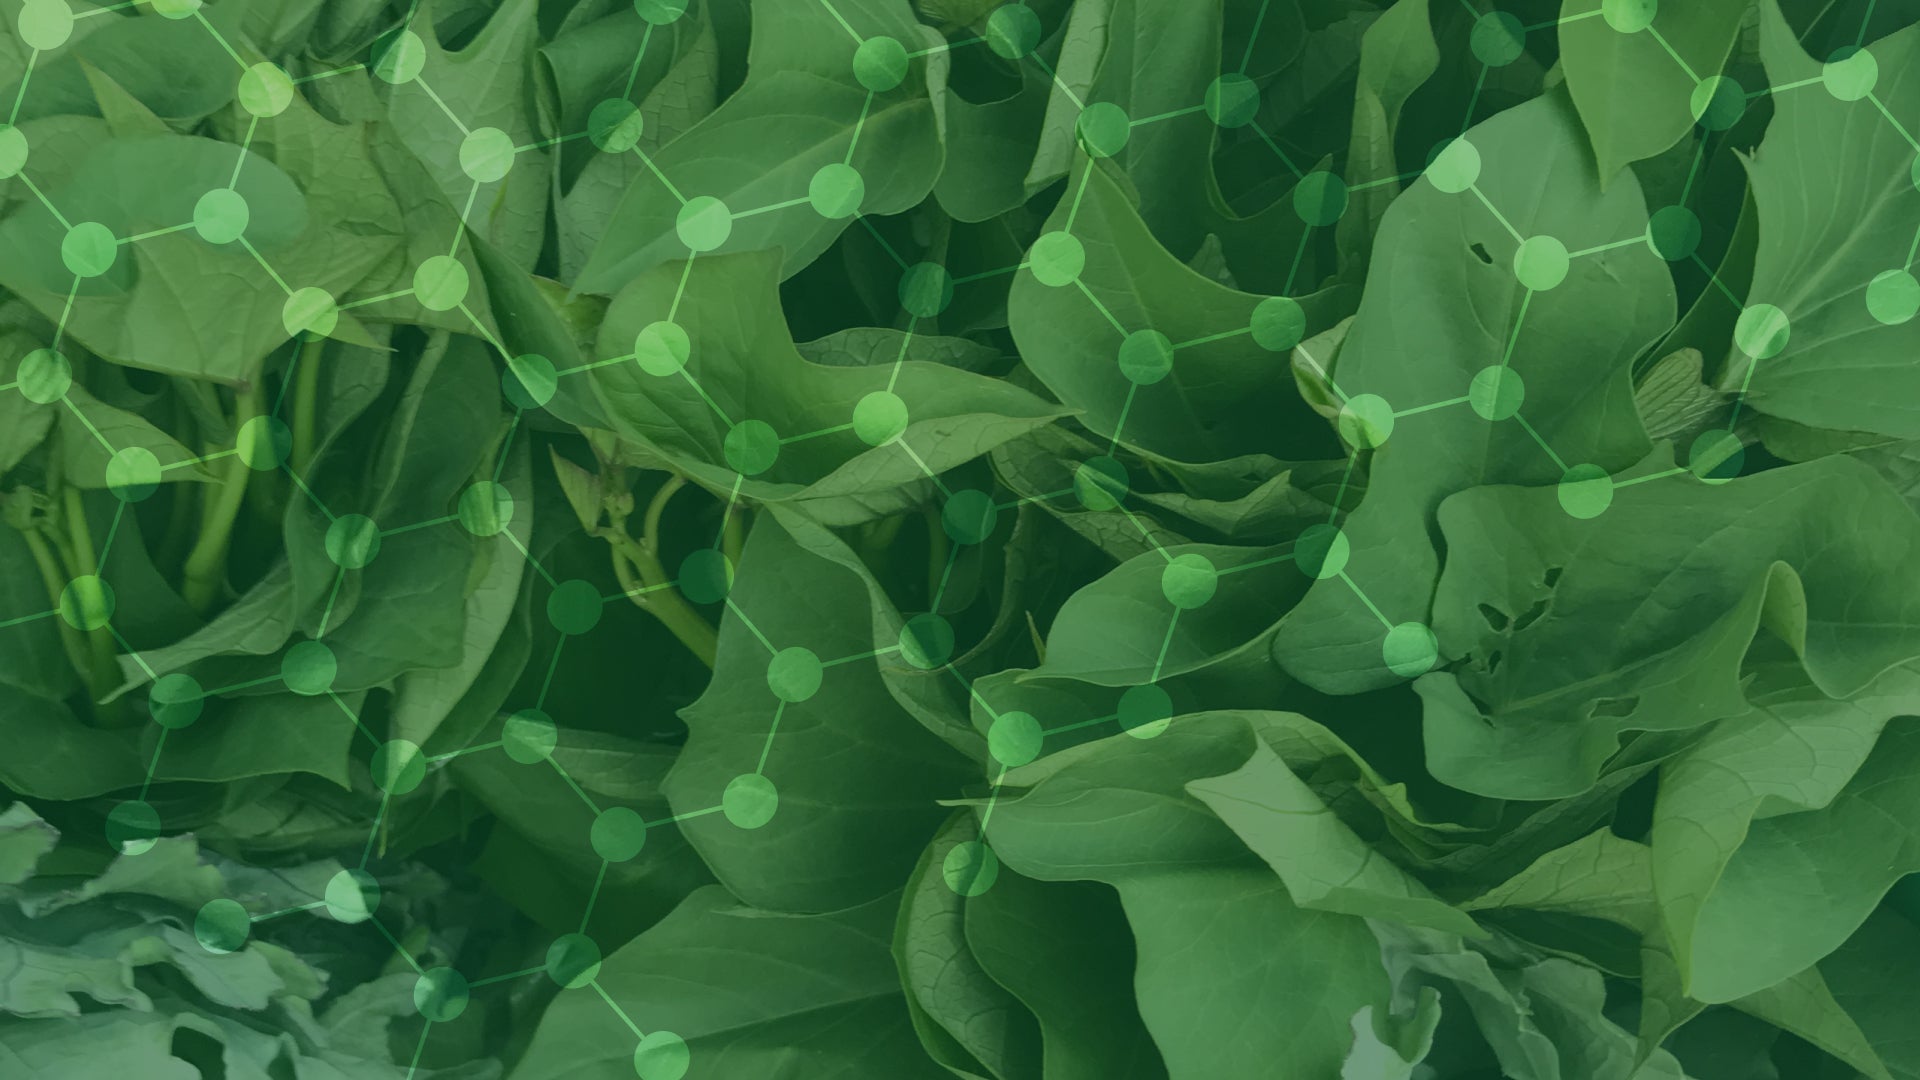 A bunch of spinach greens is overlaid with a translucent molecule pattern to signify the science of nutrition